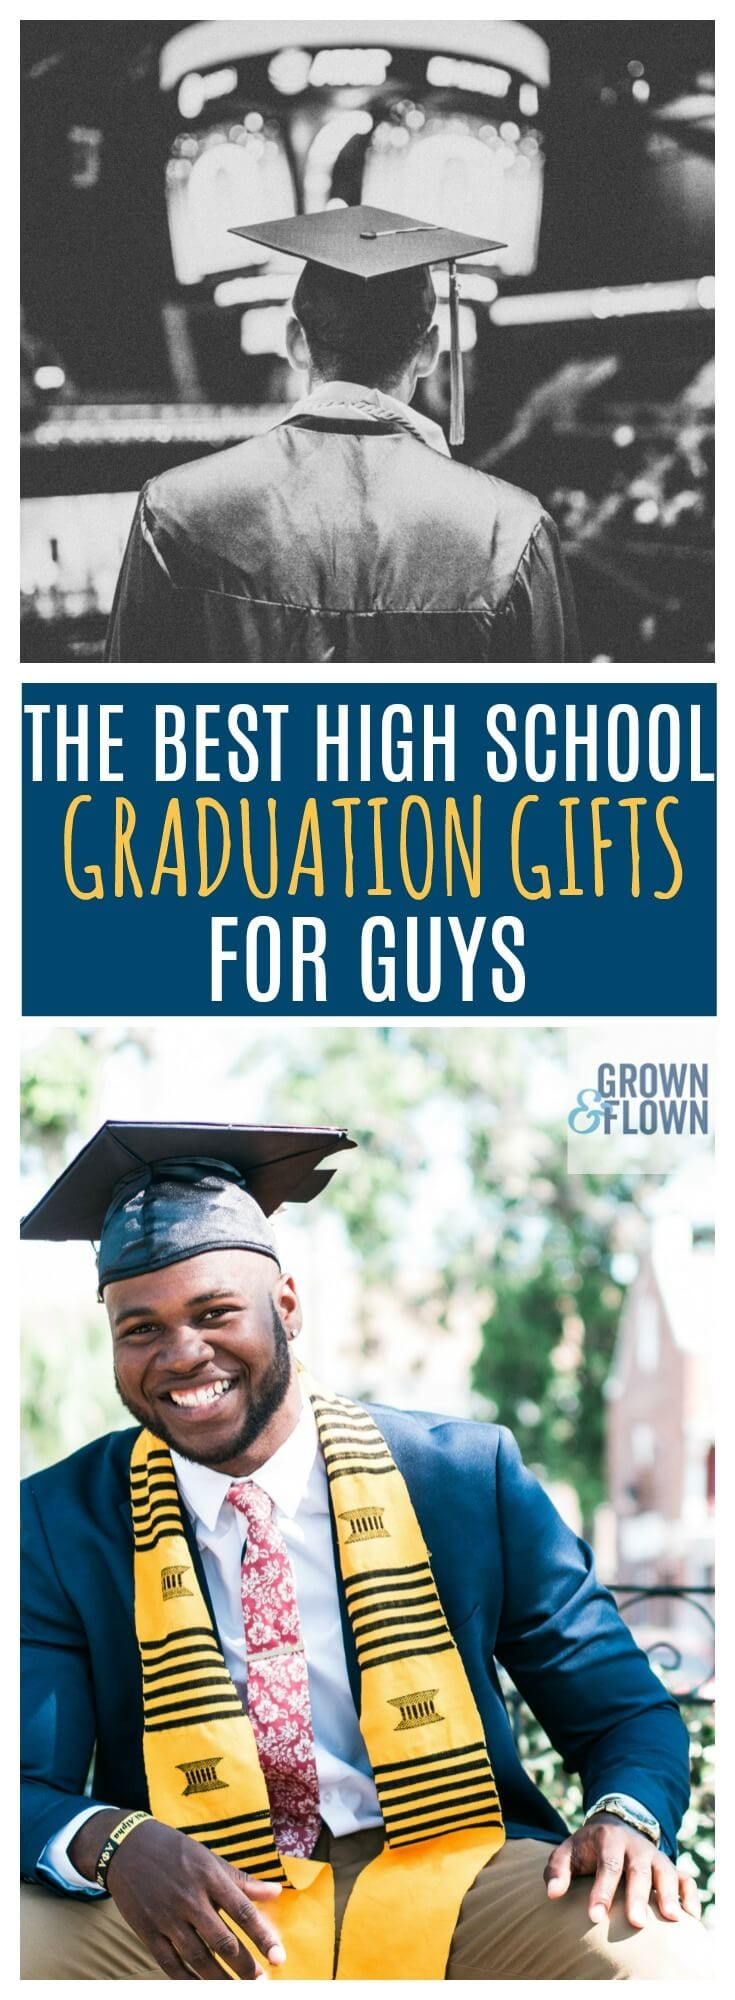 Great Gift Ideas For High School Graduation
 High School Graduation Gifts for Guys They Will Love These